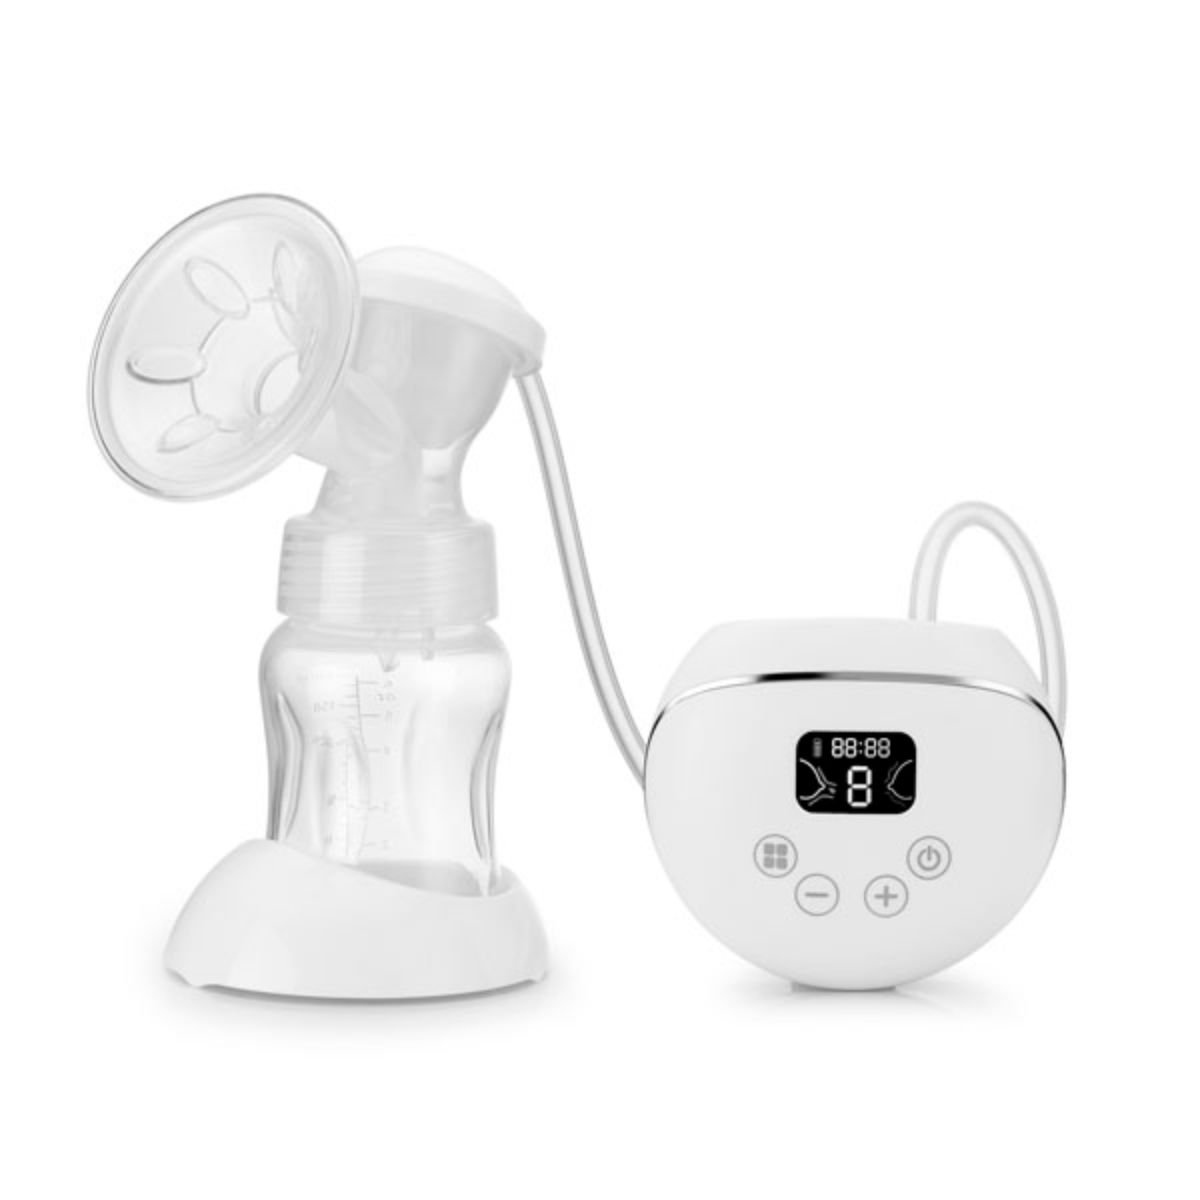 Snookums Electric Breast Pump - LCD Screen, 9 Suction Levels - 303789